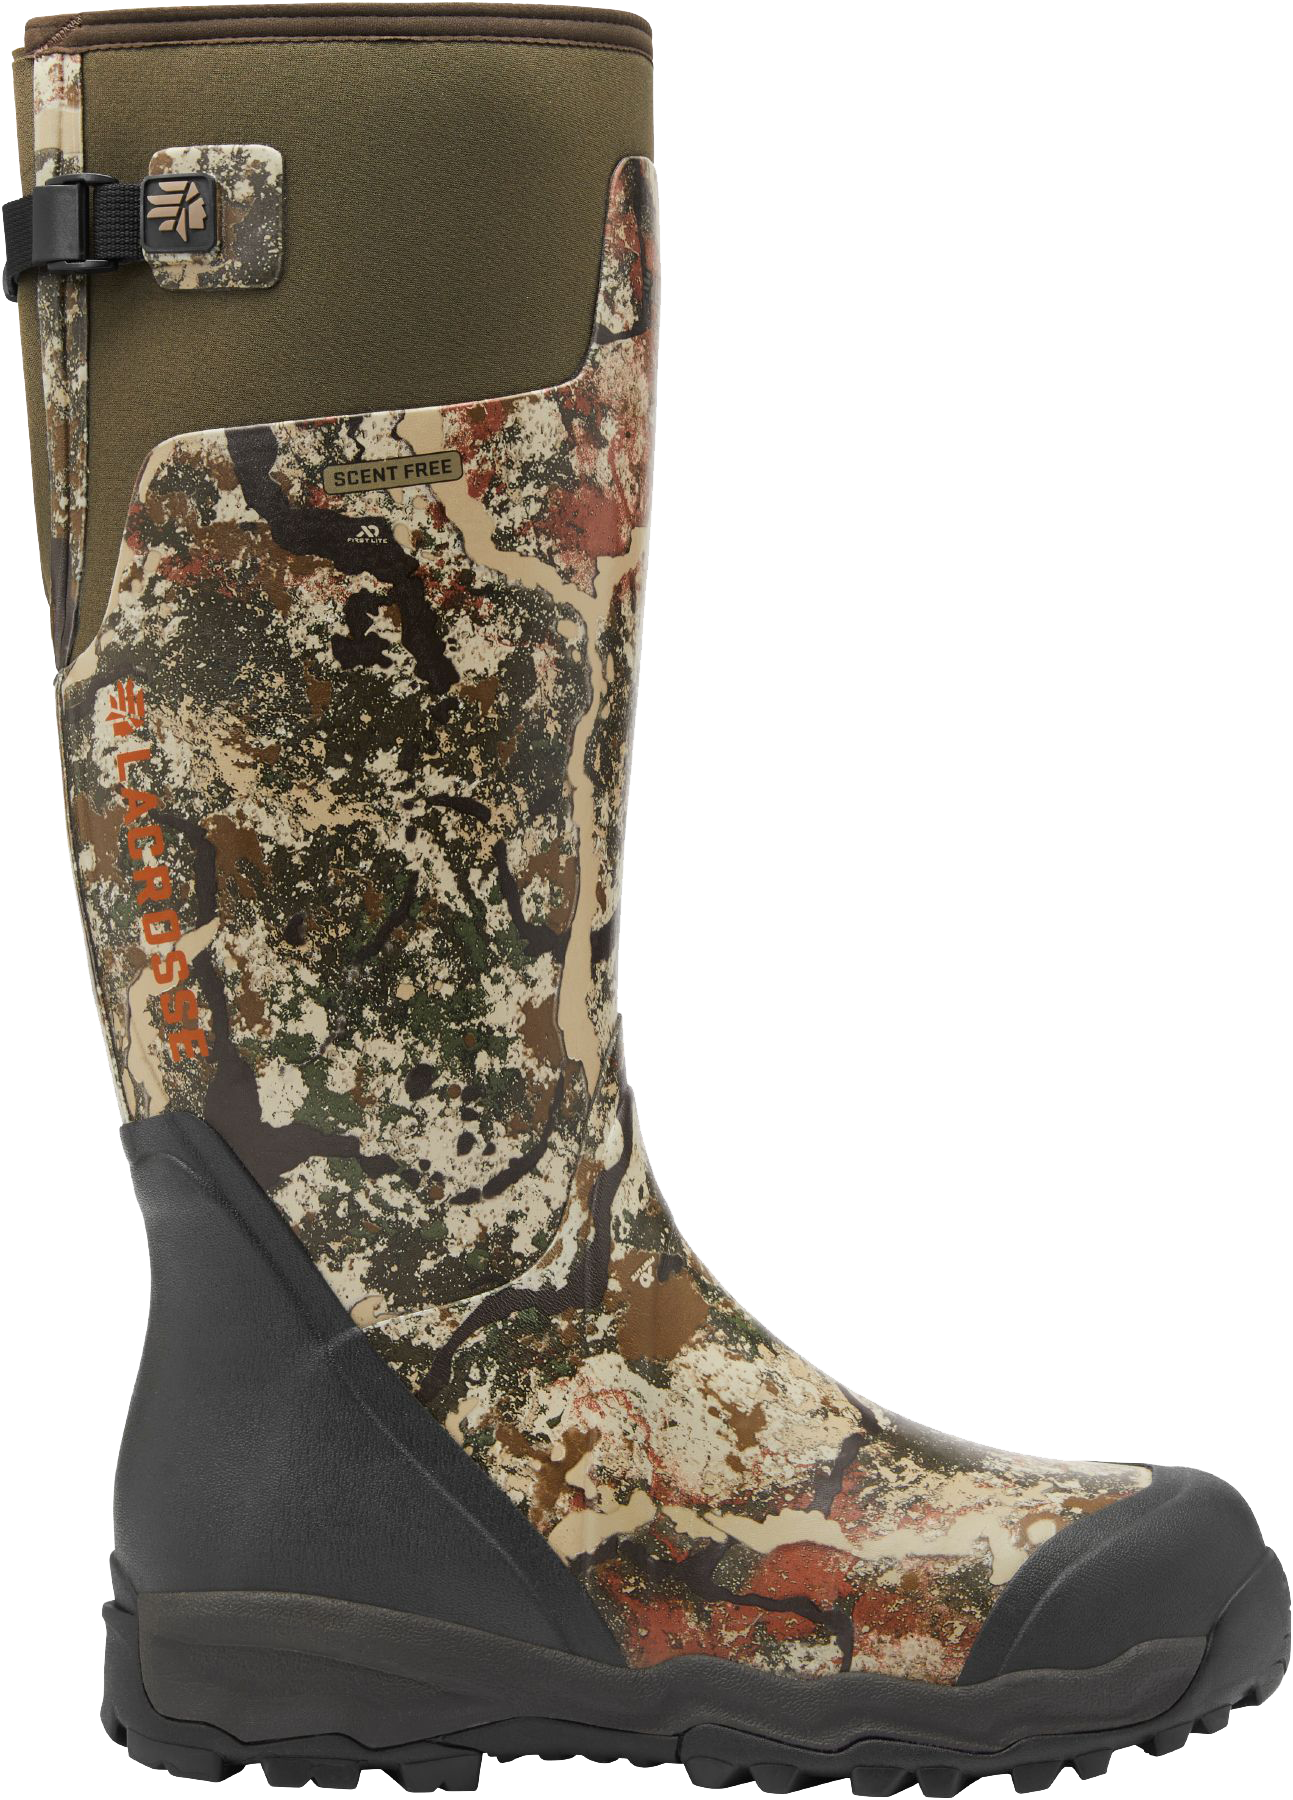 LaCrosse AlphaBurly Pro Hunting Boots for Men - First Lite Specter - 11M